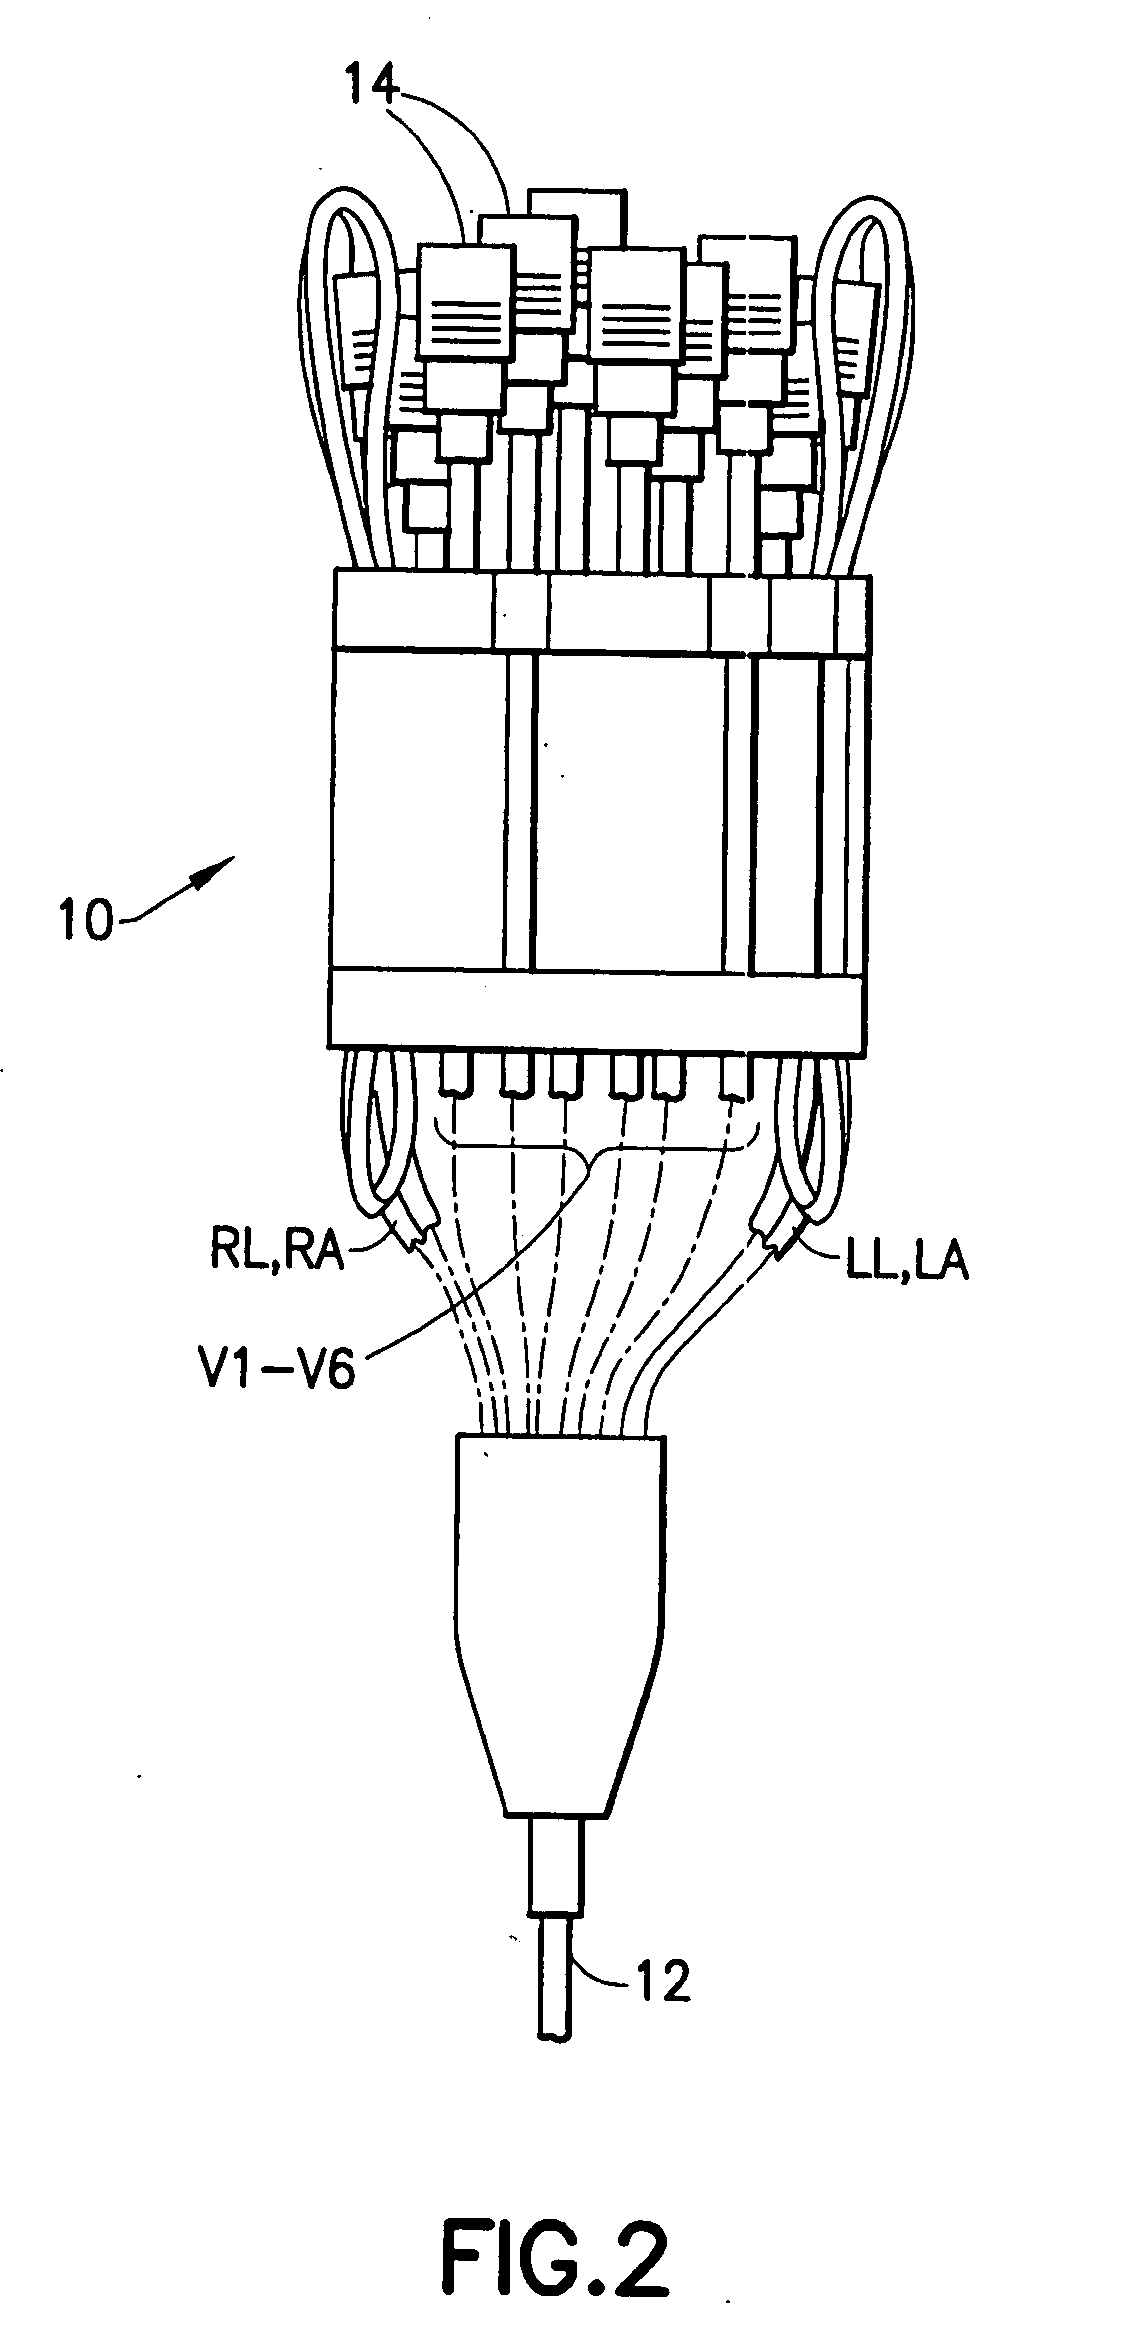 Device for arranging wire leads from medical testing apparatus